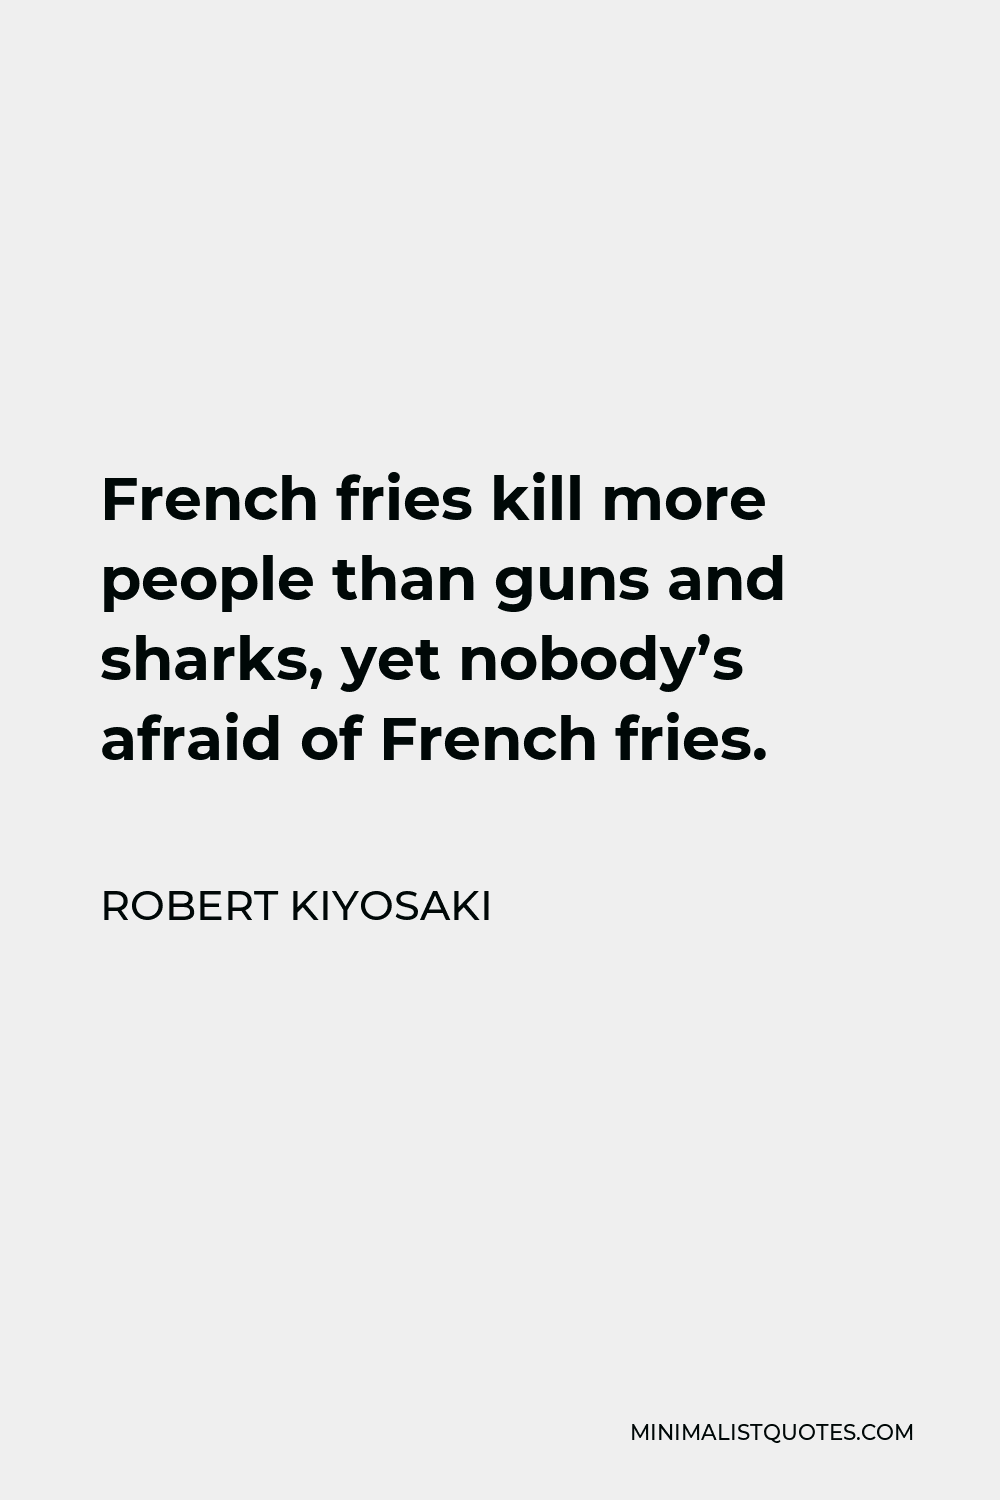 Robert Kiyosaki Quote - French fries kill more people than guns and sharks, yet nobody’s afraid of French fries.